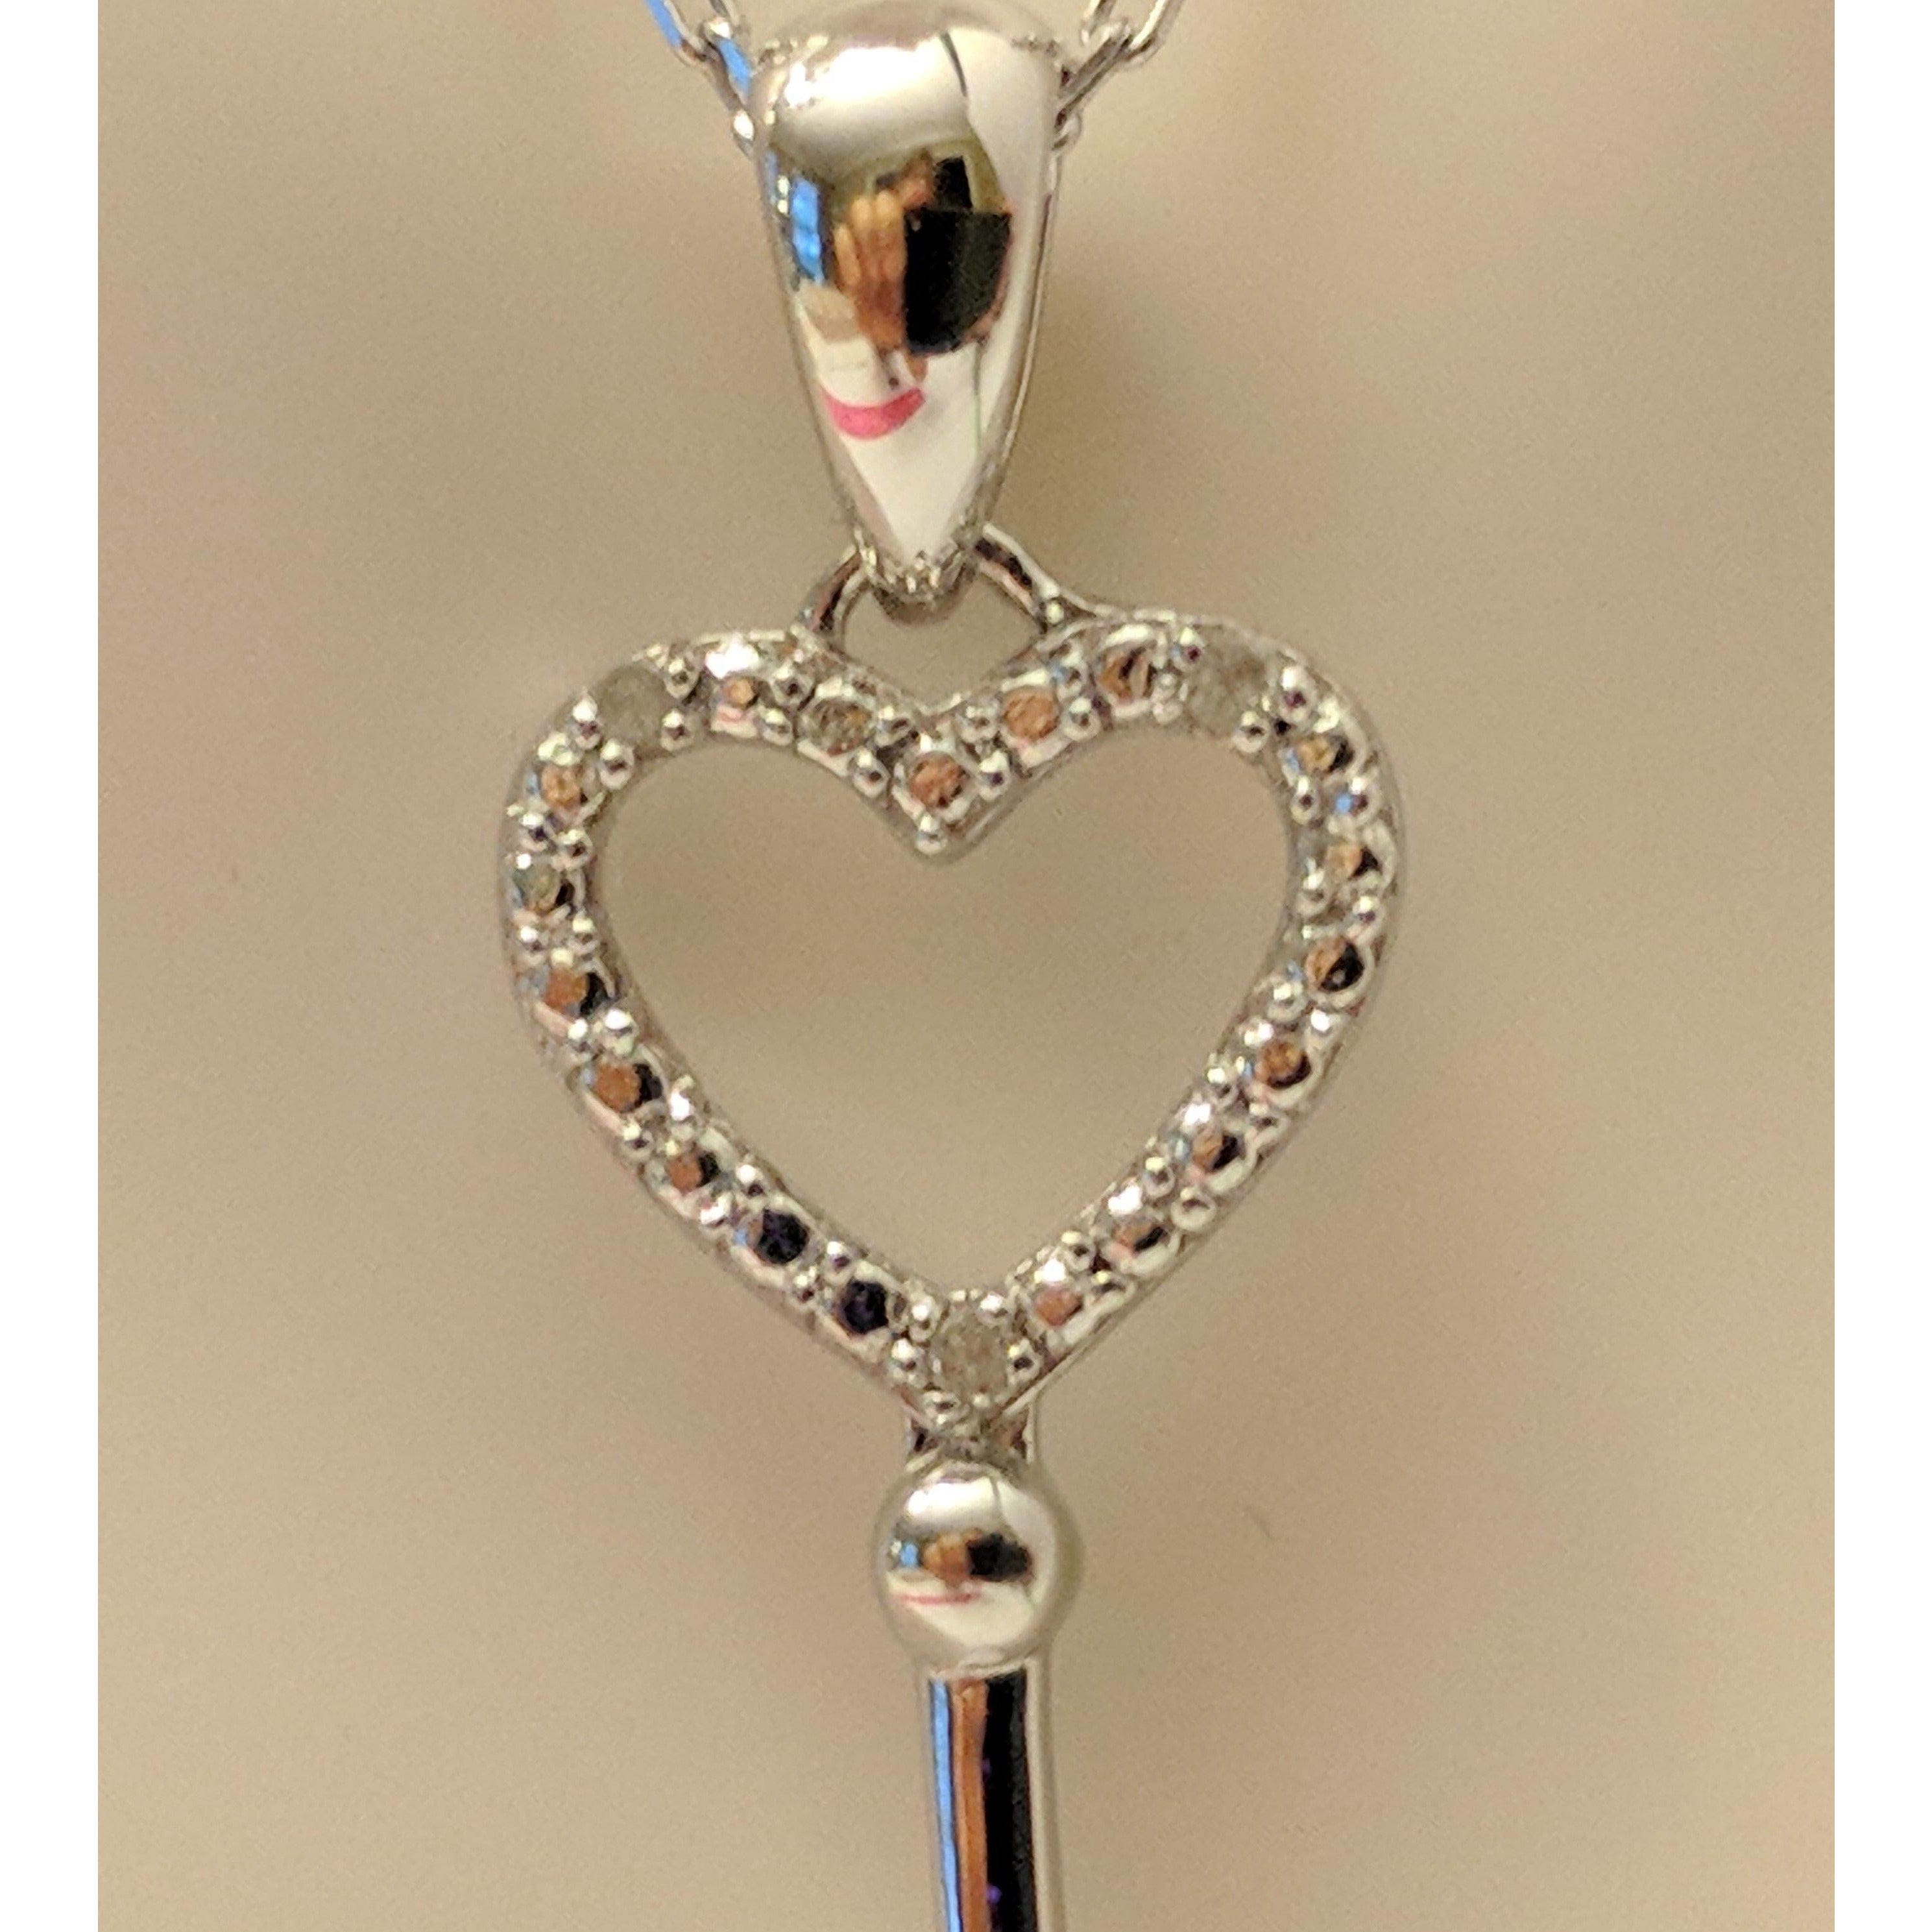 Key to My Heart Diamond Pendant in Solid 925 Silver-Elegant, Lovely Gift Idea! - The Pink Pigs, A Compassionate Boutique